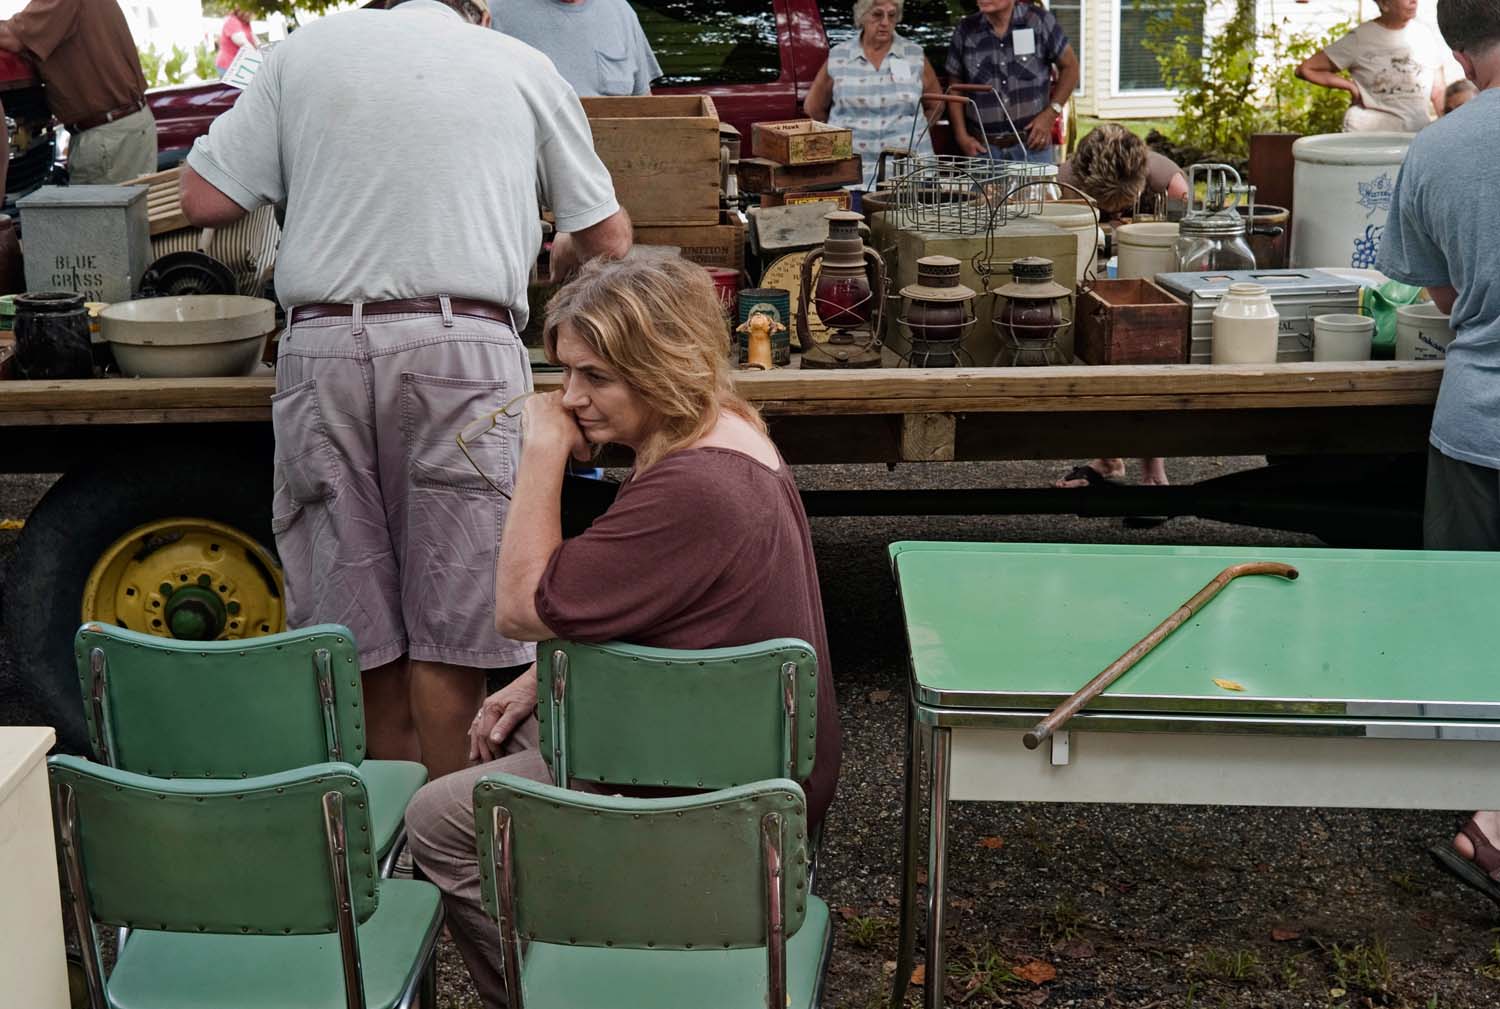  Unidentified woman sitting outside in a vintage green plastic kitchen chair at an auction. Warsaw, IL. August, 2009 